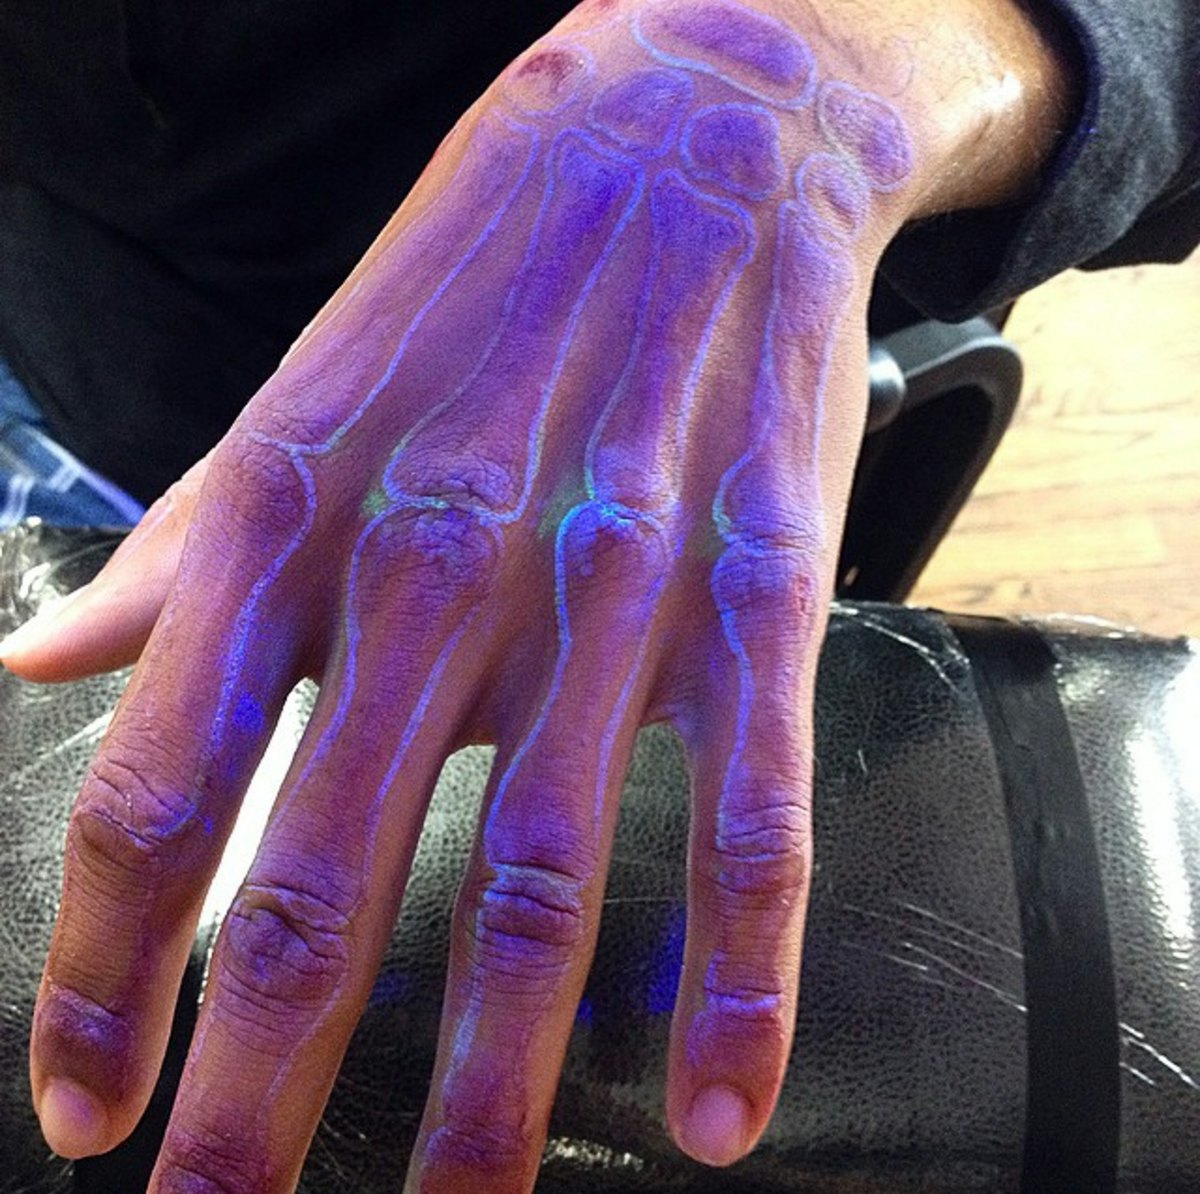 6 Questions About UV Black Light Tattoos To Consider Before Getting One Of Your Own